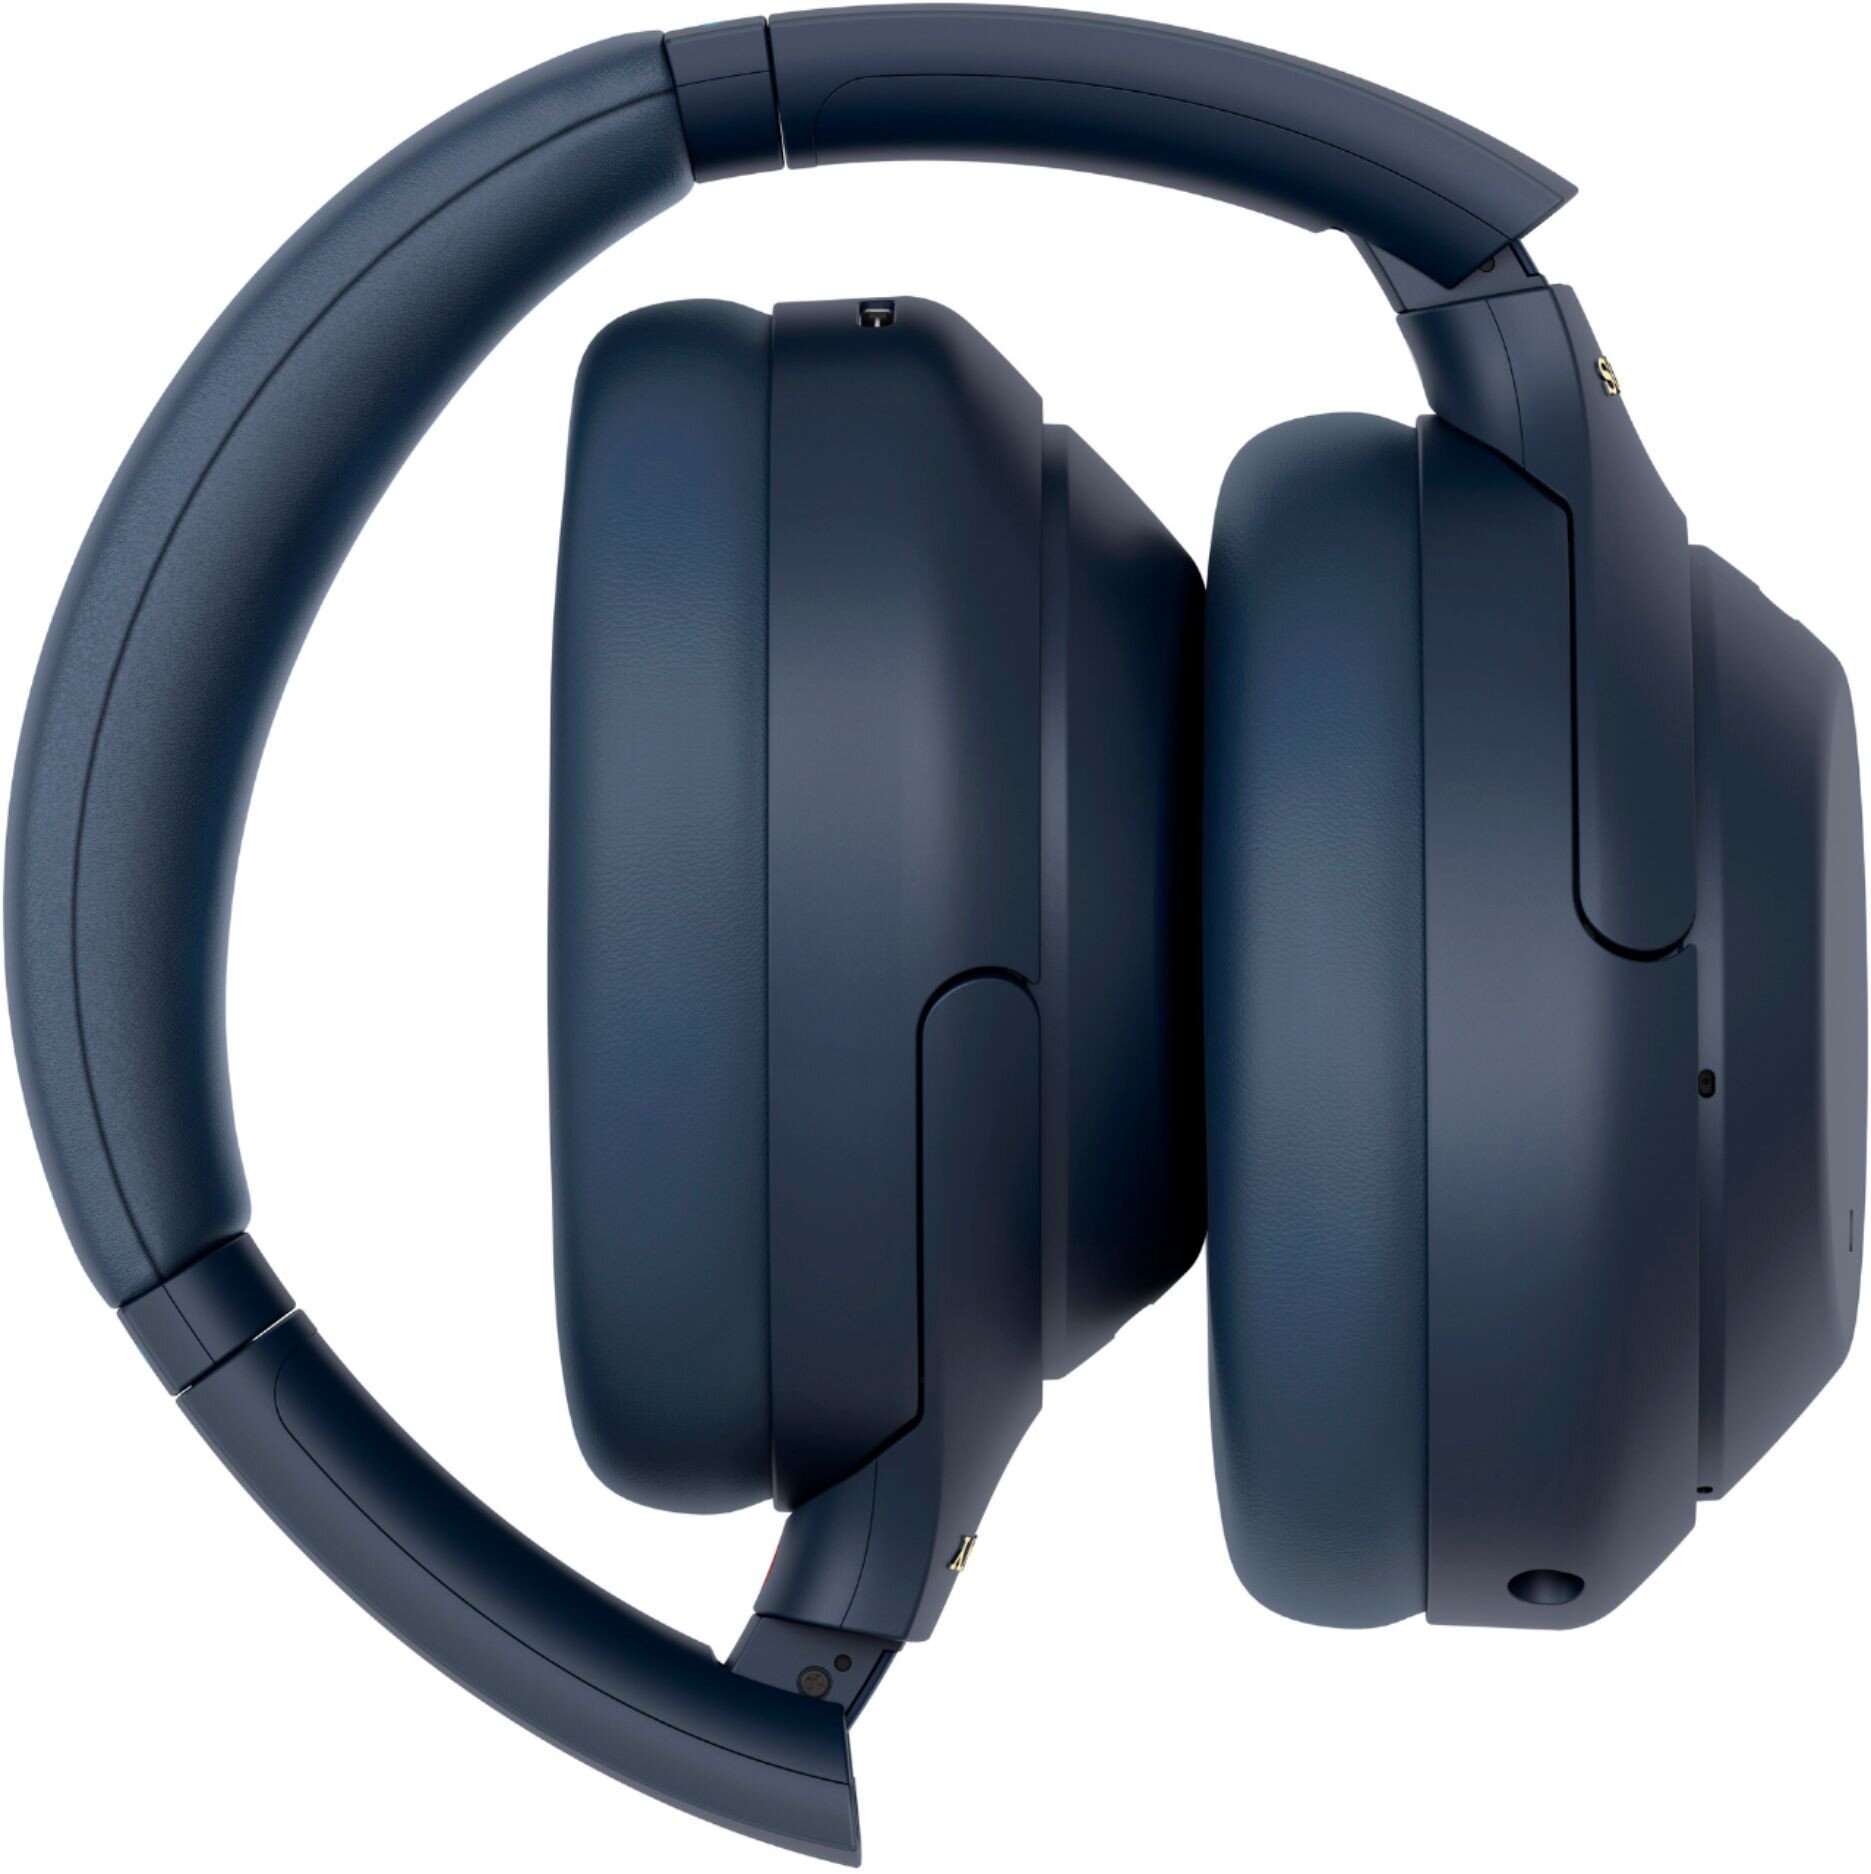 Sony WH-1000XM4 Wireless Noise-Canceling Over-Ear Headphones (Midnight Blue)